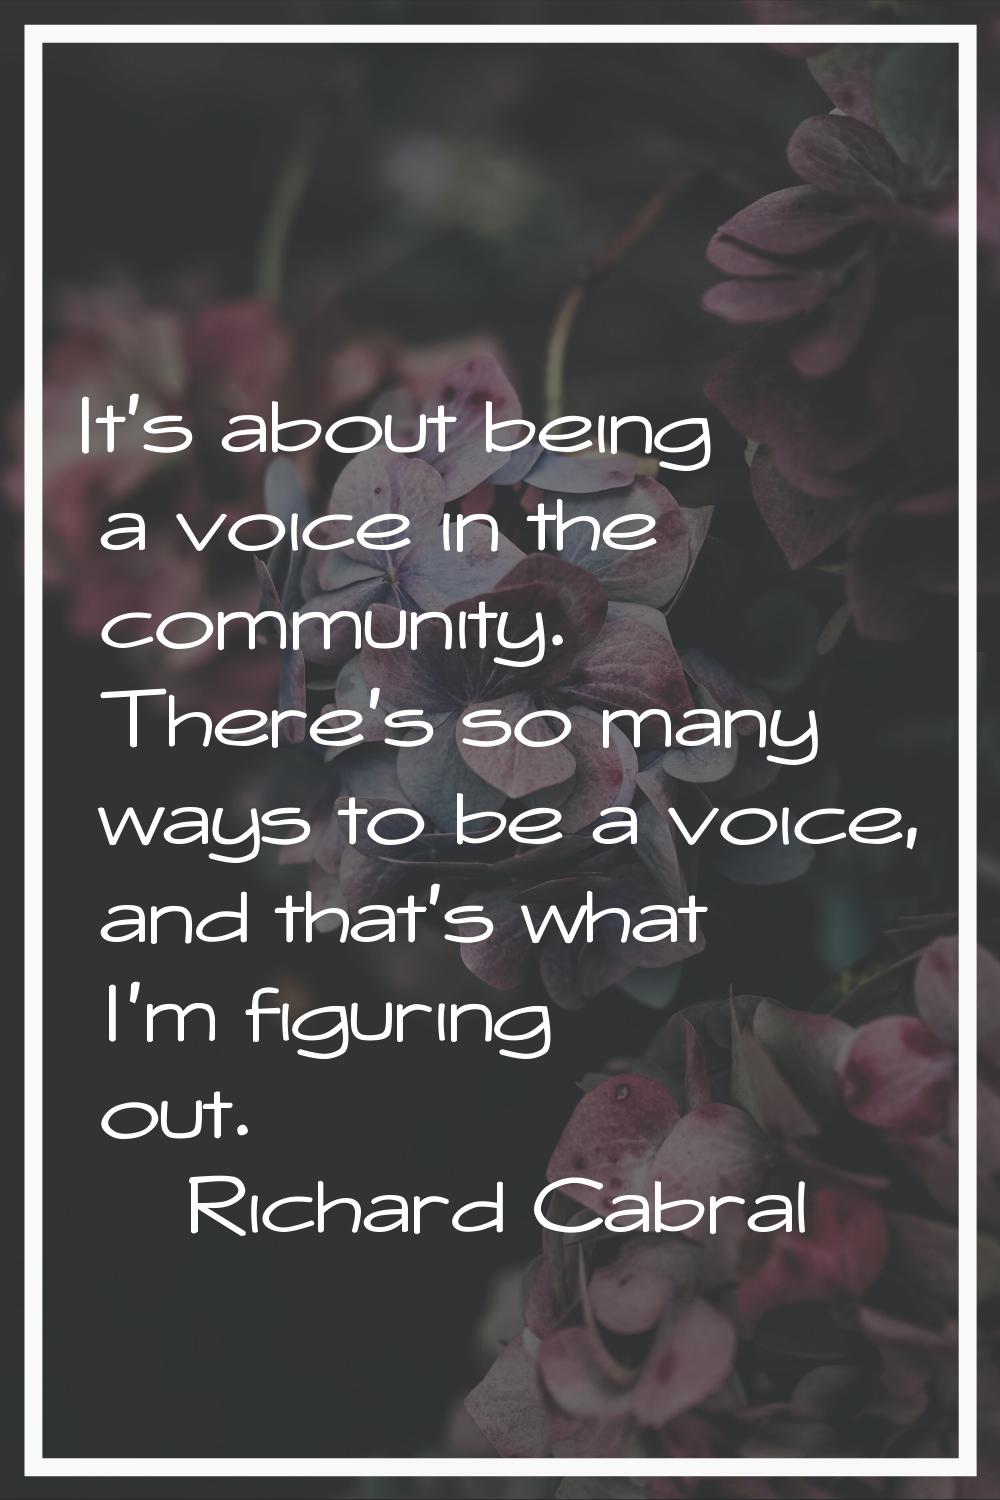 It's about being a voice in the community. There's so many ways to be a voice, and that's what I'm 